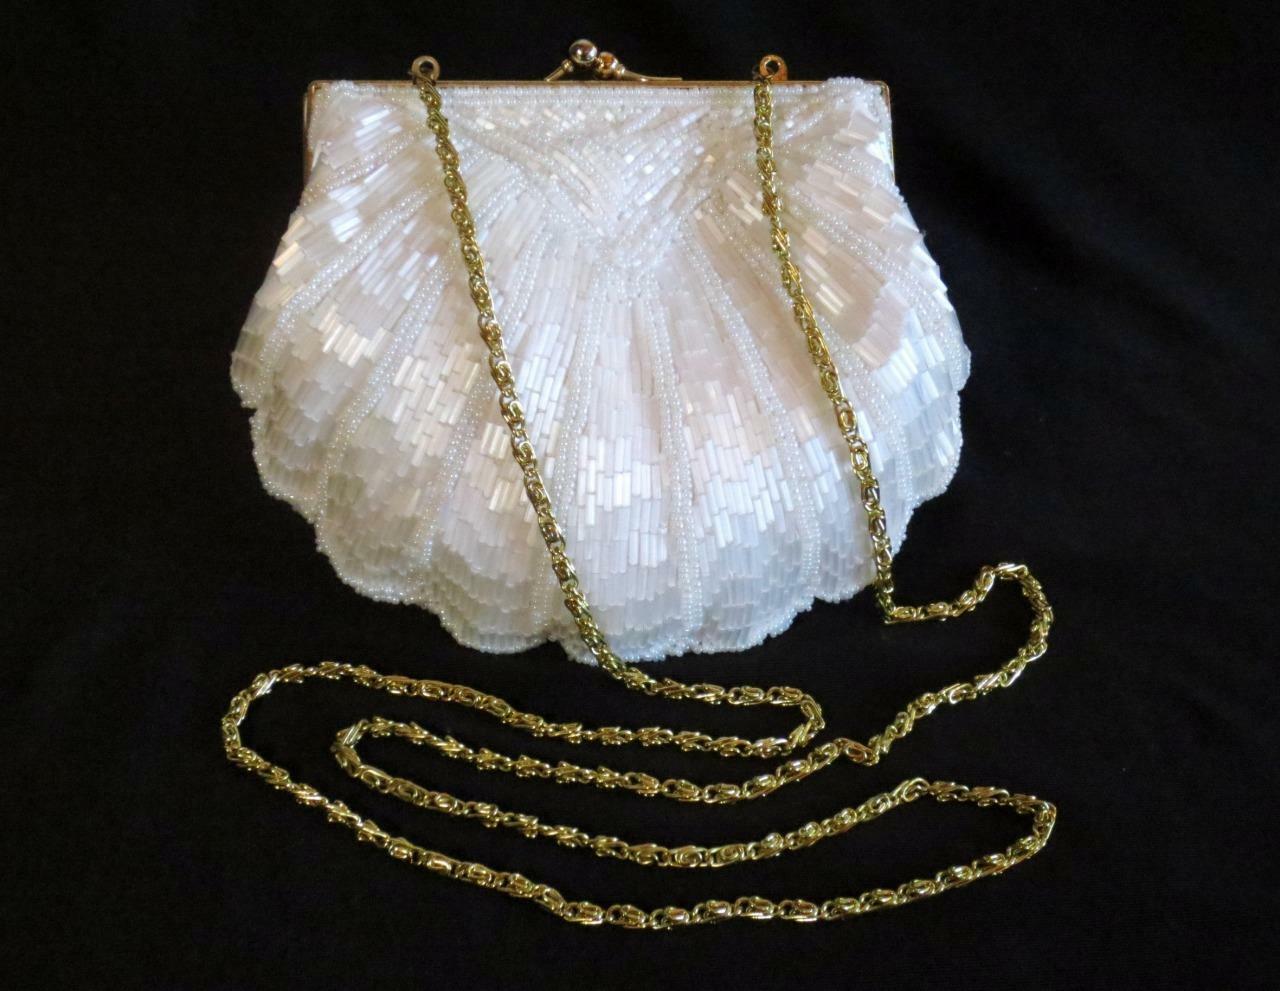 La Regale White Beaded Shell Bombing free shipping Evening S Bag Purse w Clutch Chain Many popular brands